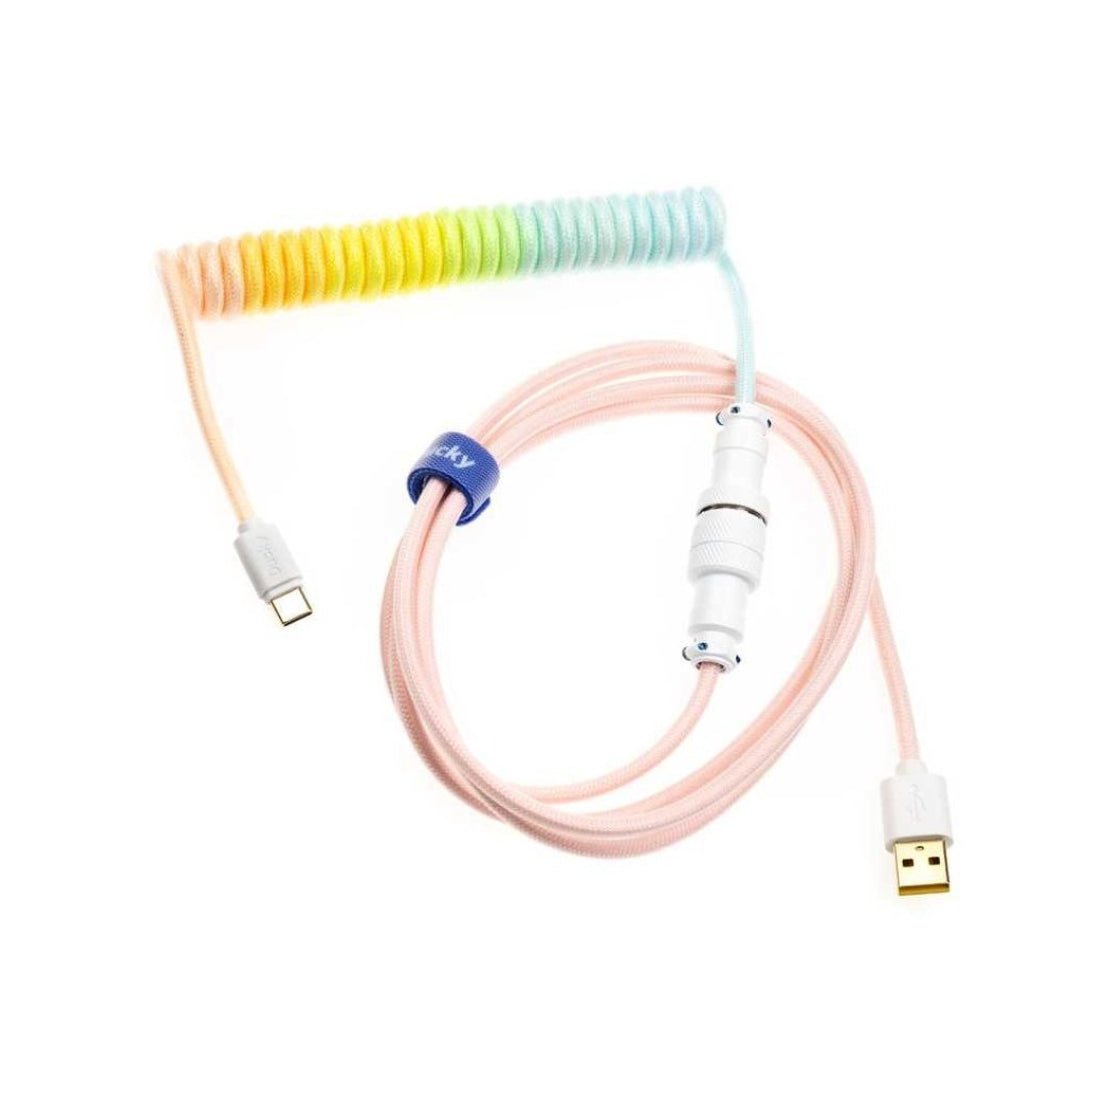 Ducky Gradient Premicord Custom Keyboard Cable - Cotton Candy - كابل - Store 974 | ستور ٩٧٤